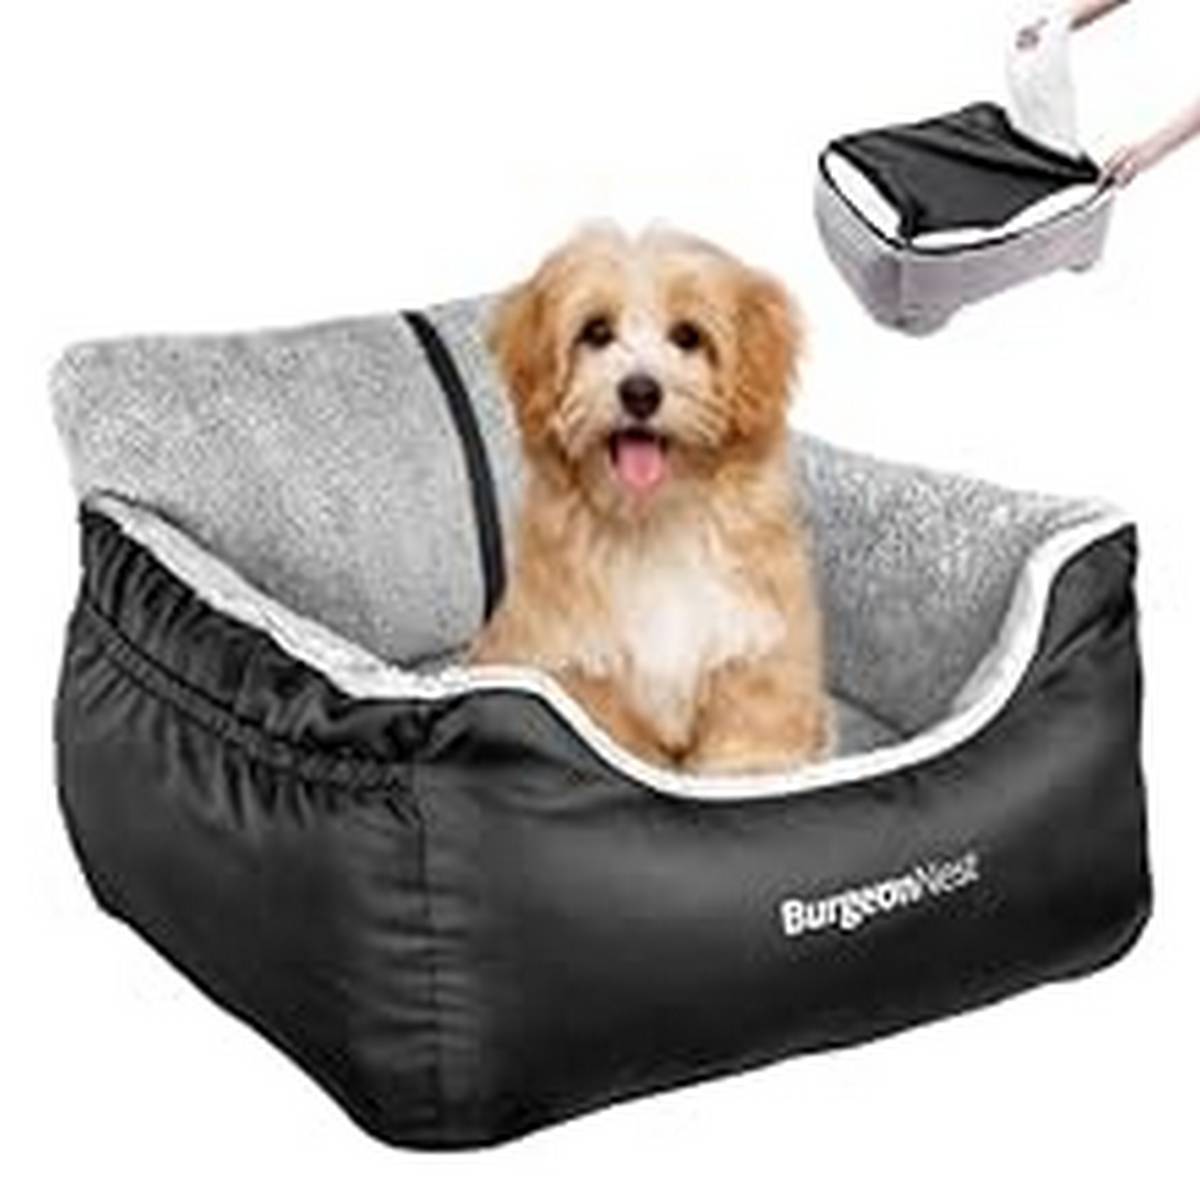 Supplies_BurgeonNest Dog Car Seat for Small Dogs- Fully Detachable and Washable Dog Carseats Small Under - Soft Dog Booster Seats with Storage Pockets and Clip-On Leash Portable Dog Car